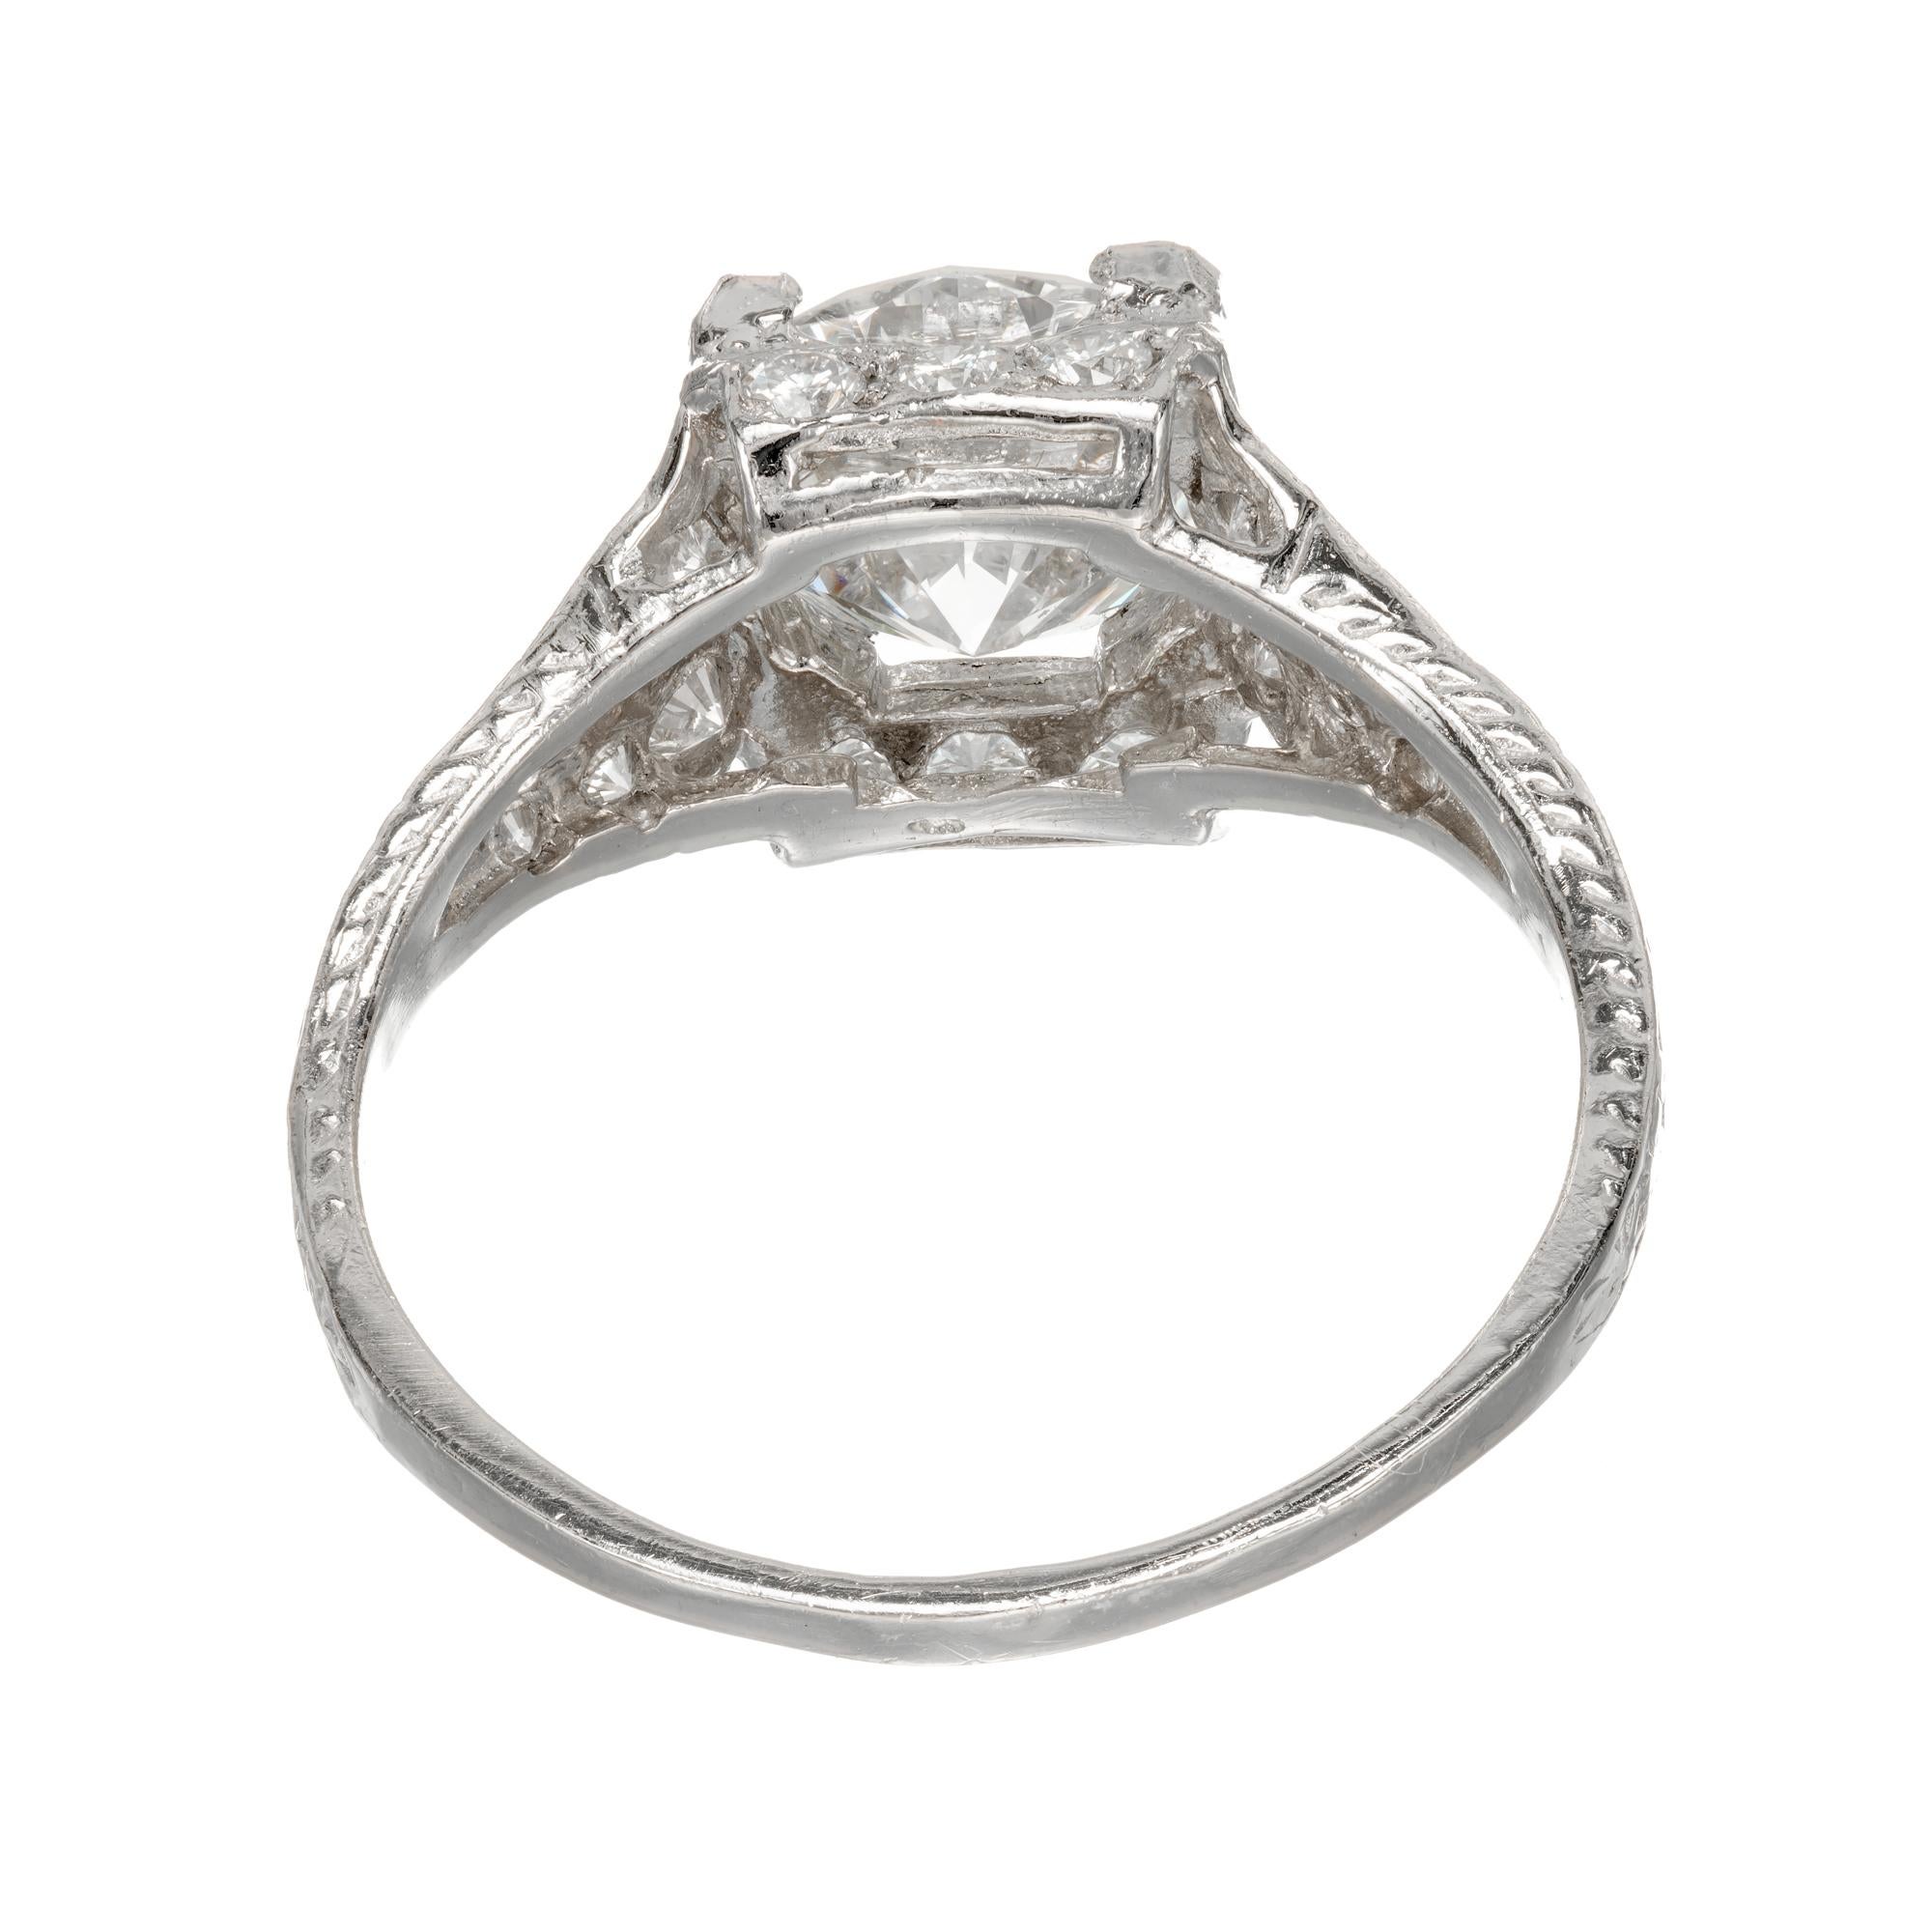 EGL Certified 1.56 Carat Diamond Platinum Art Deco Cut Engagement Ring In Good Condition For Sale In Stamford, CT